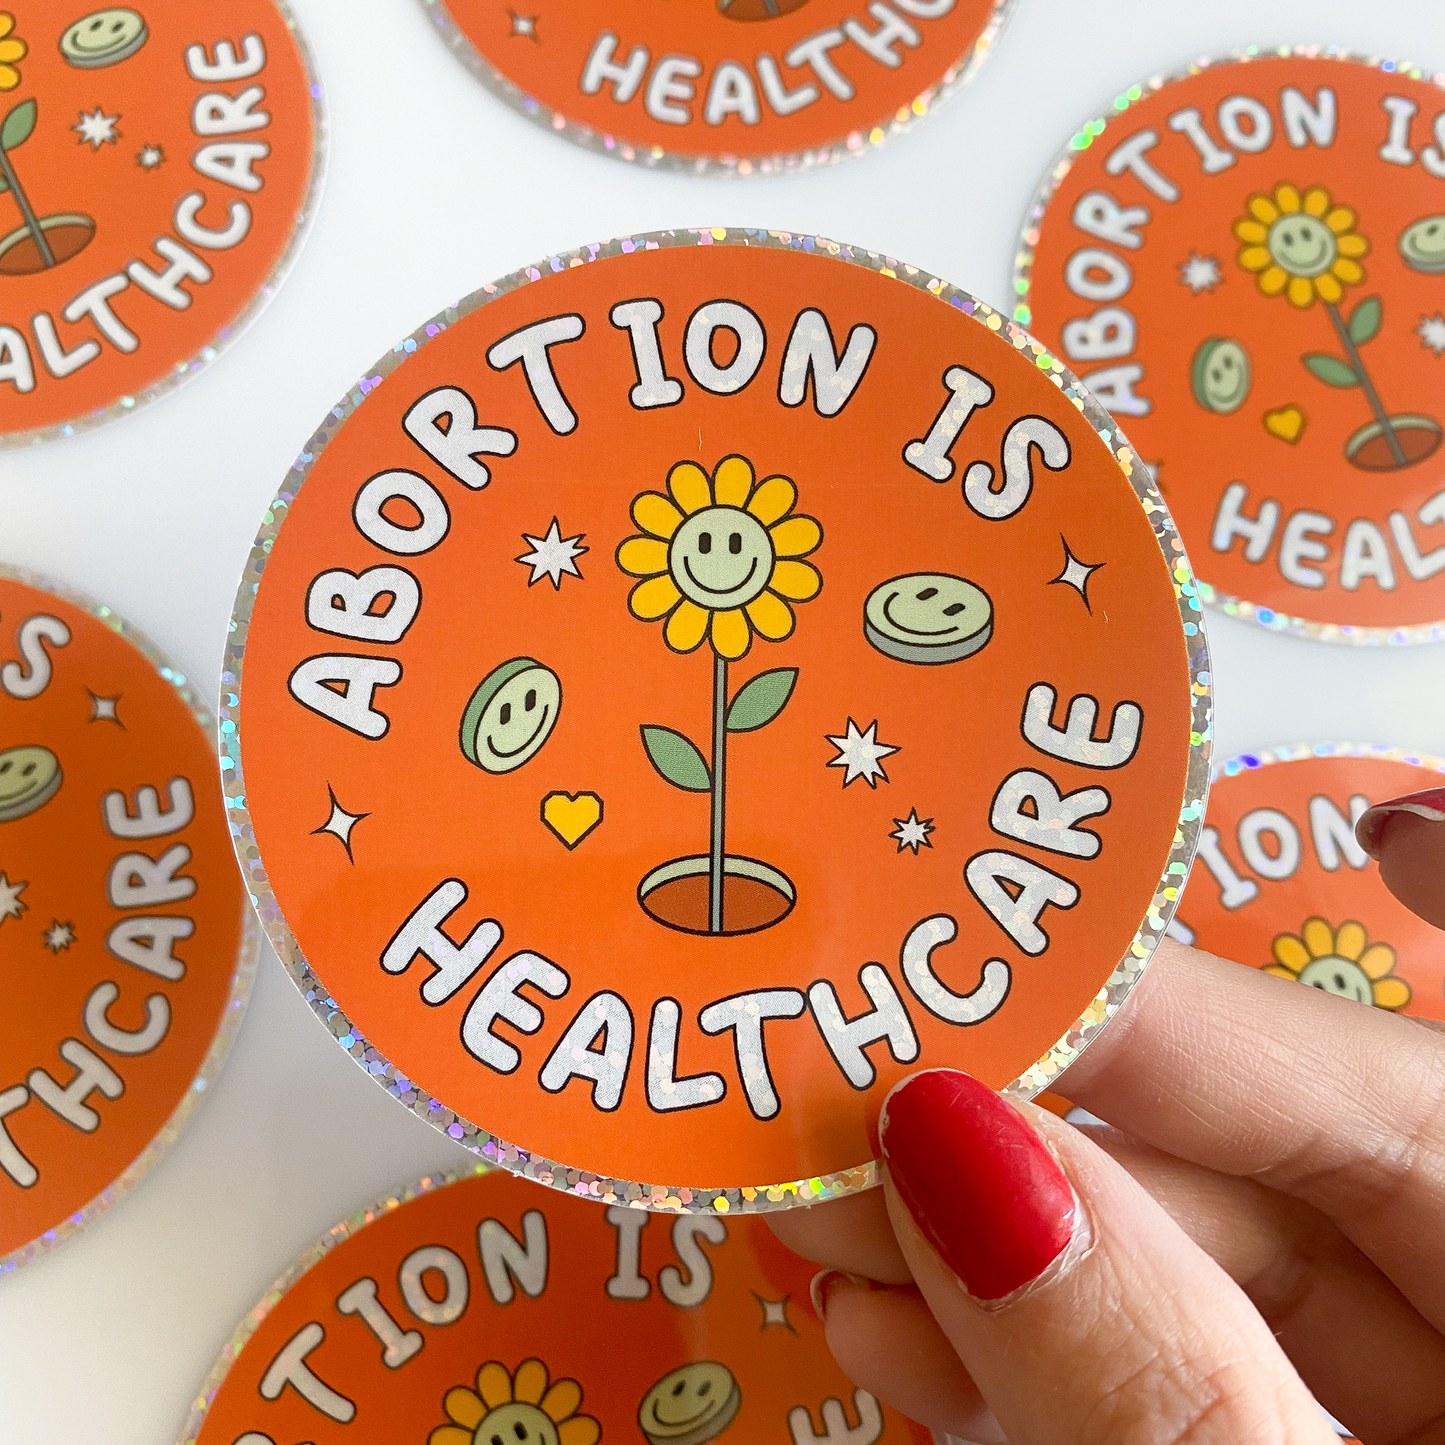 'ABORTION IS HEALTHCARE' STICKER